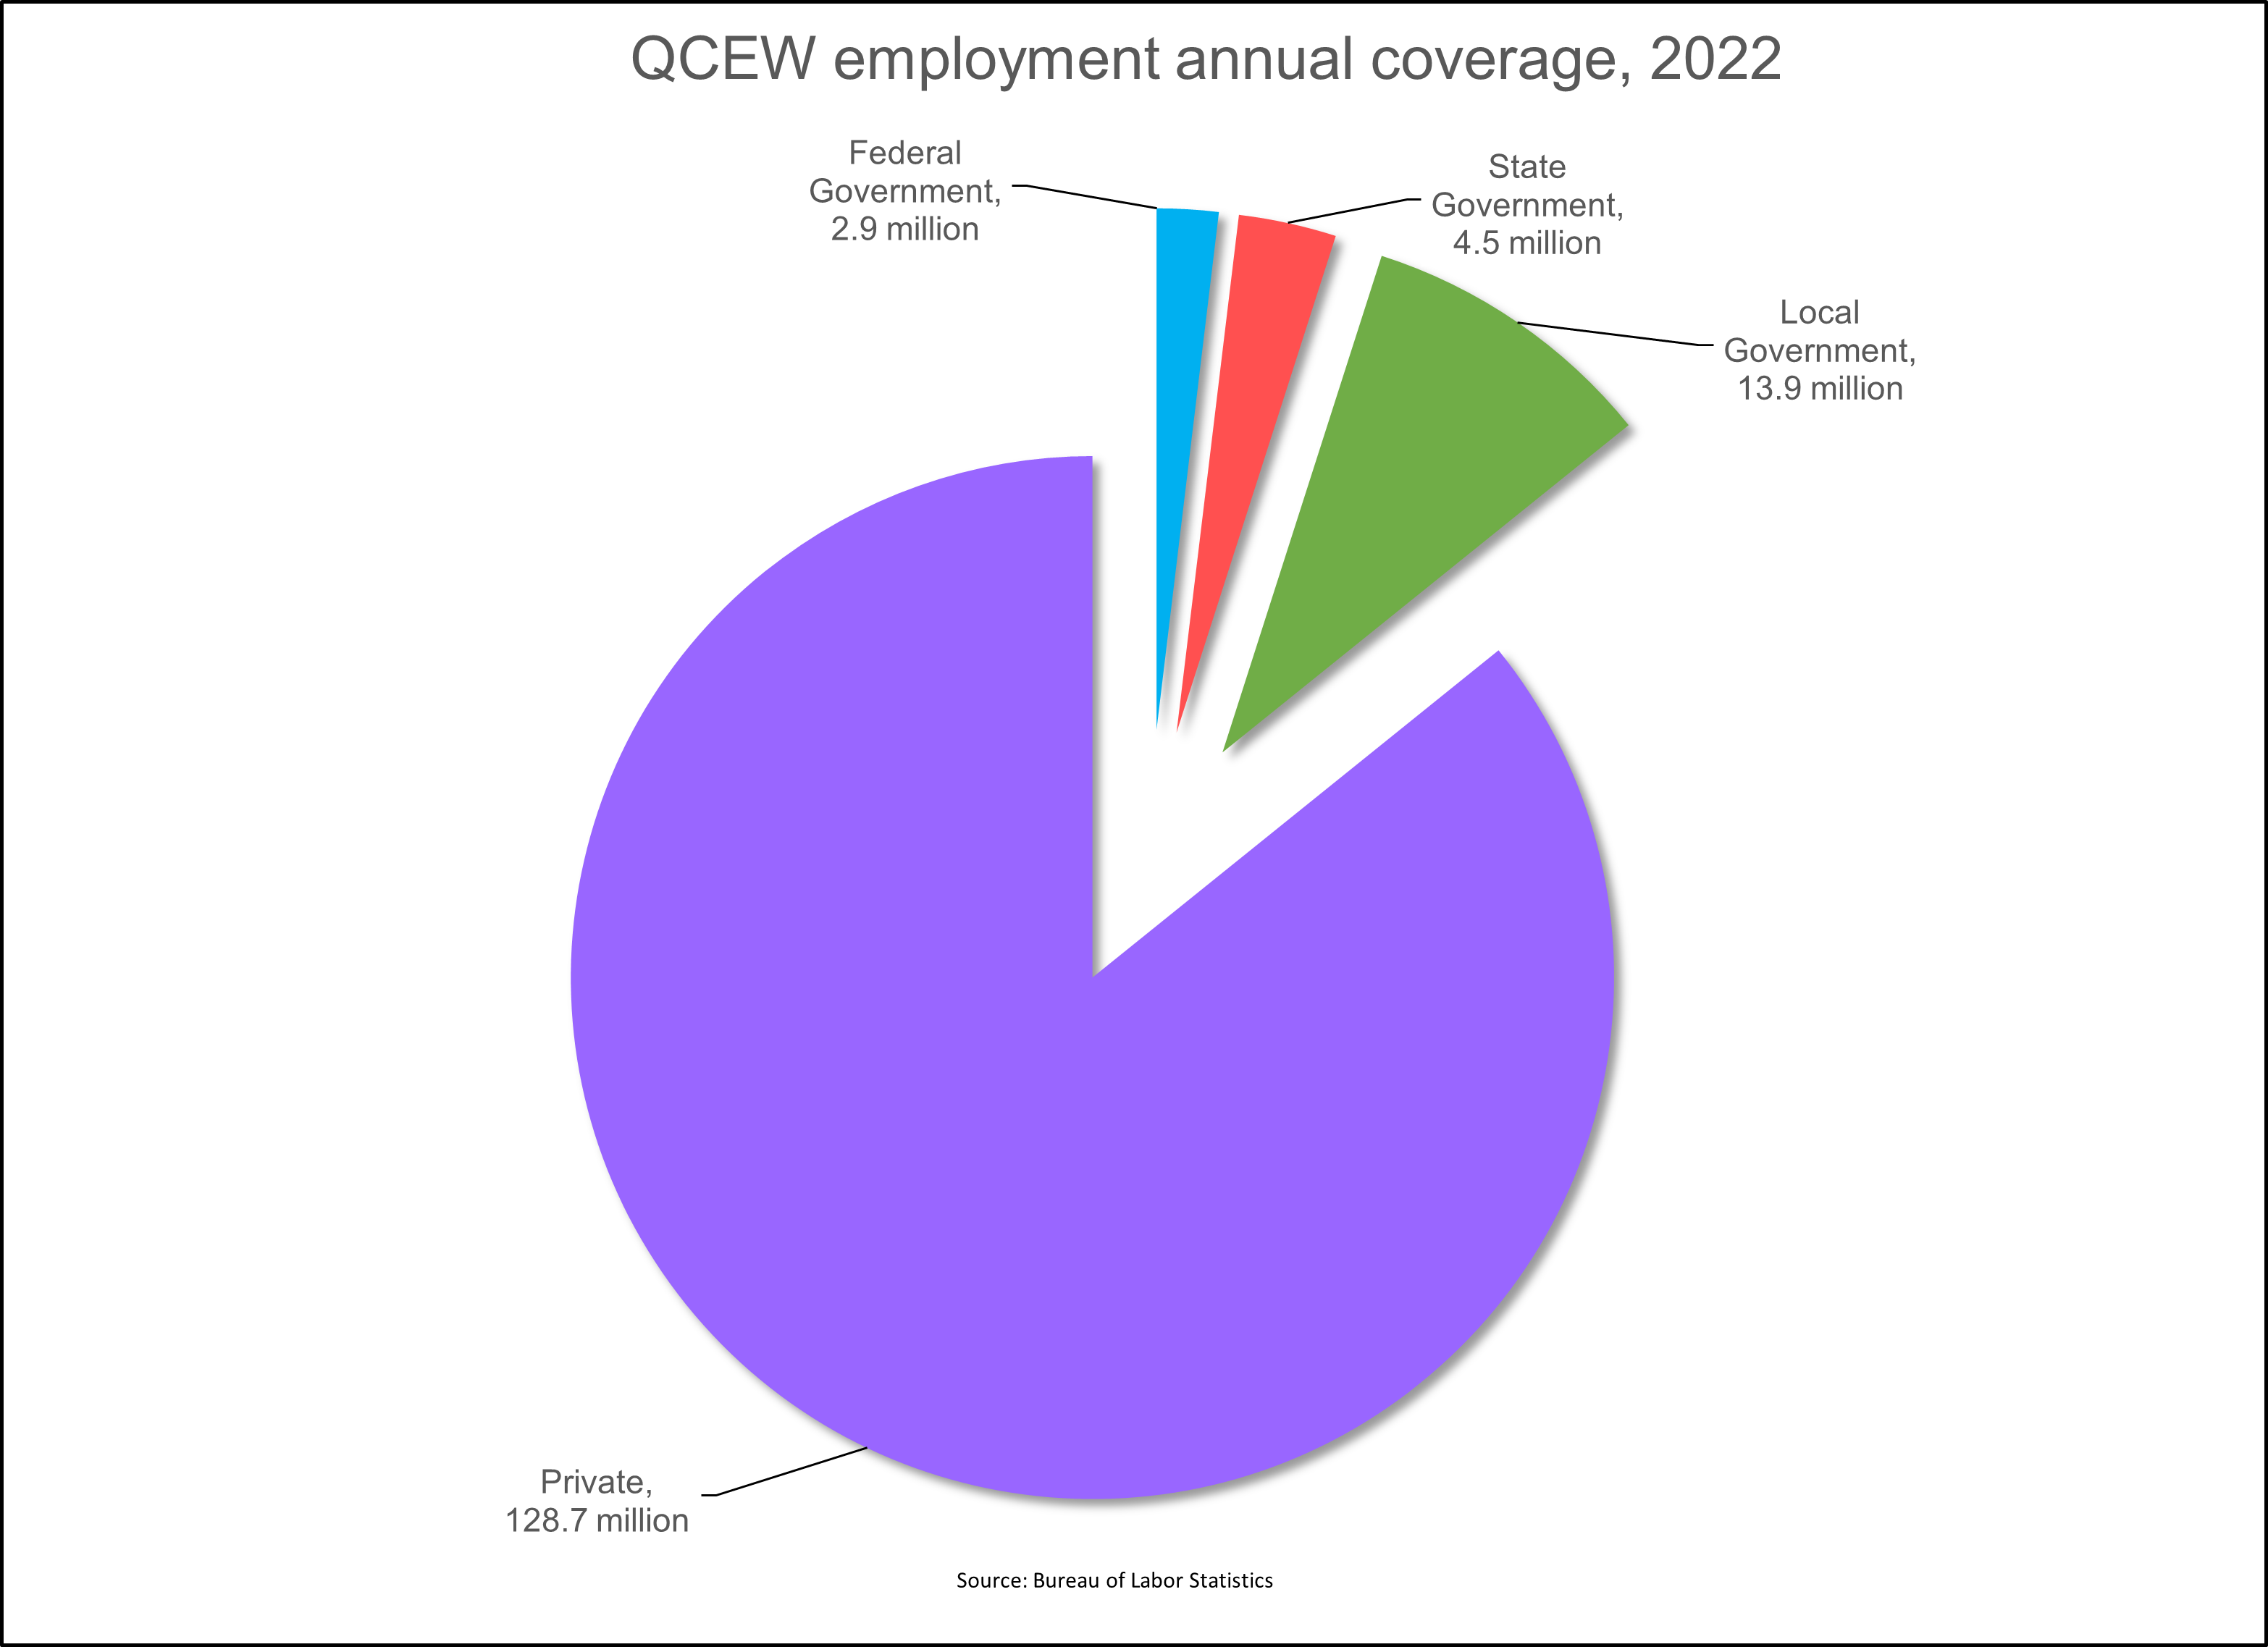 QCEW employment annual coverage, 2022